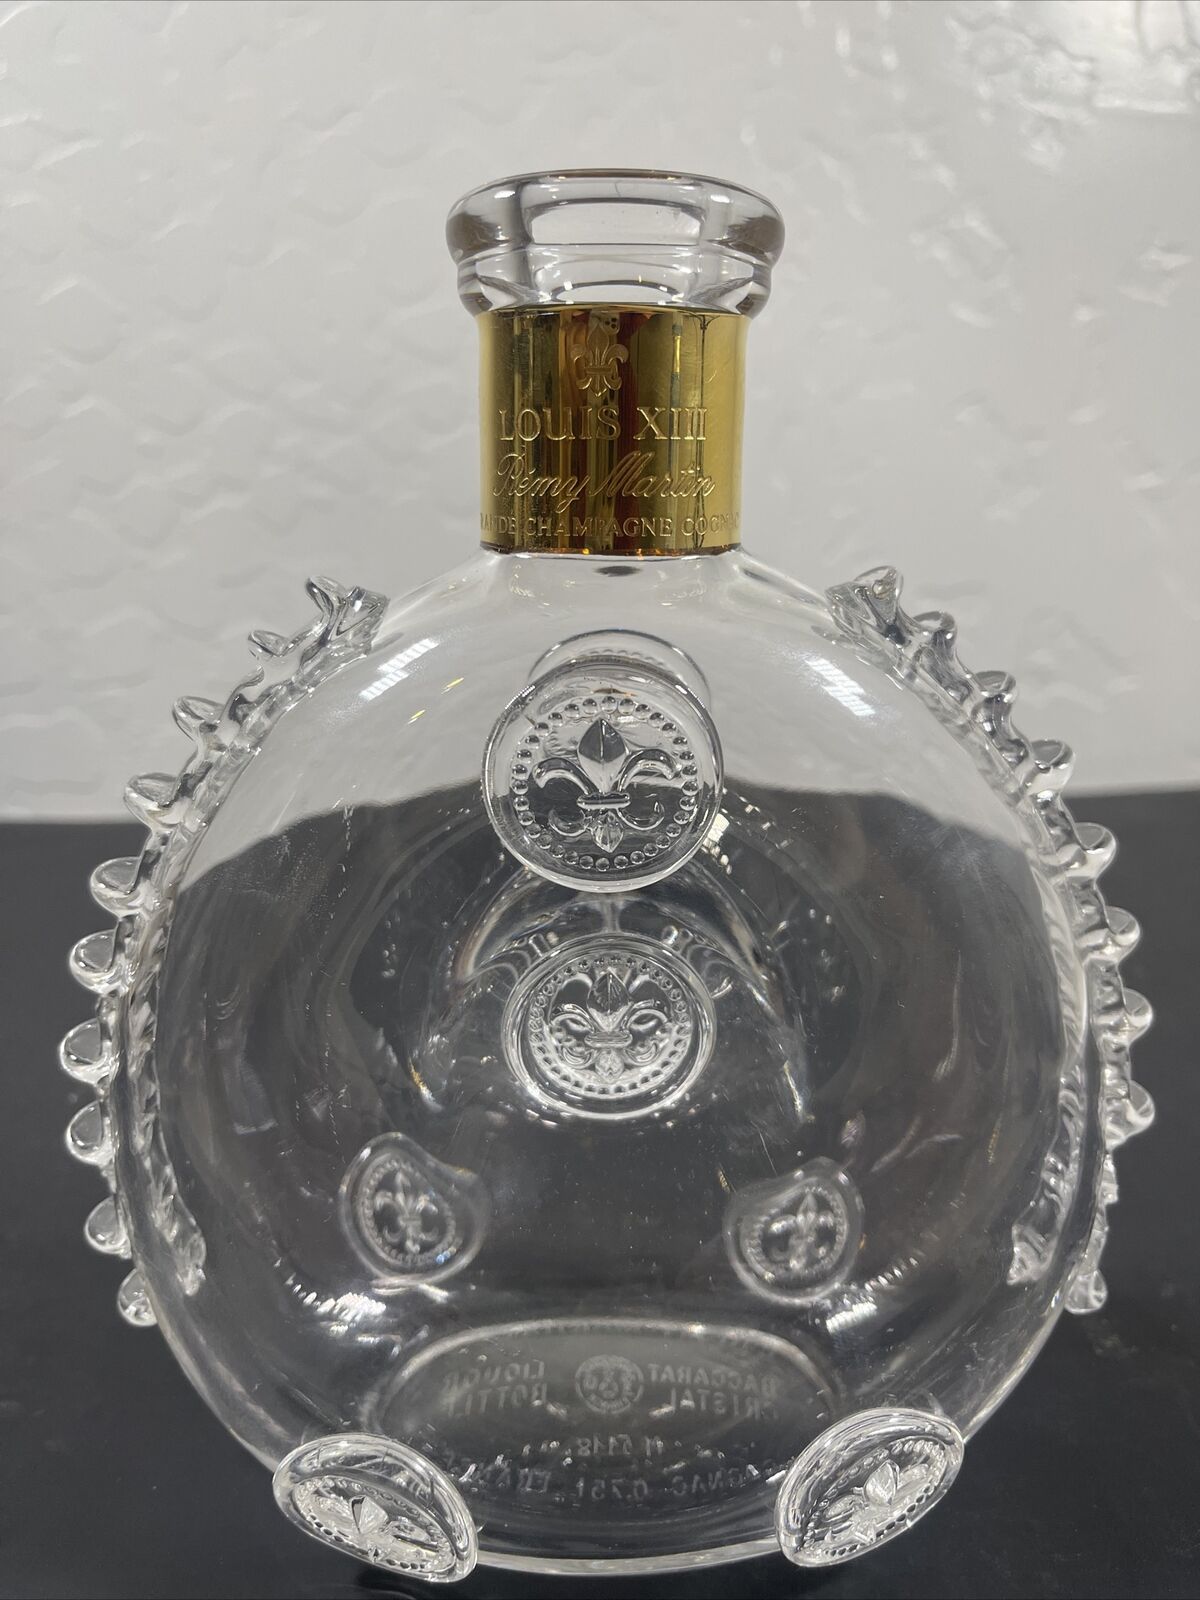 BACCARAT REMY MARTIN LOUIS XIII COGNAC CRYSTAL GLASS DECANTER (Empty)